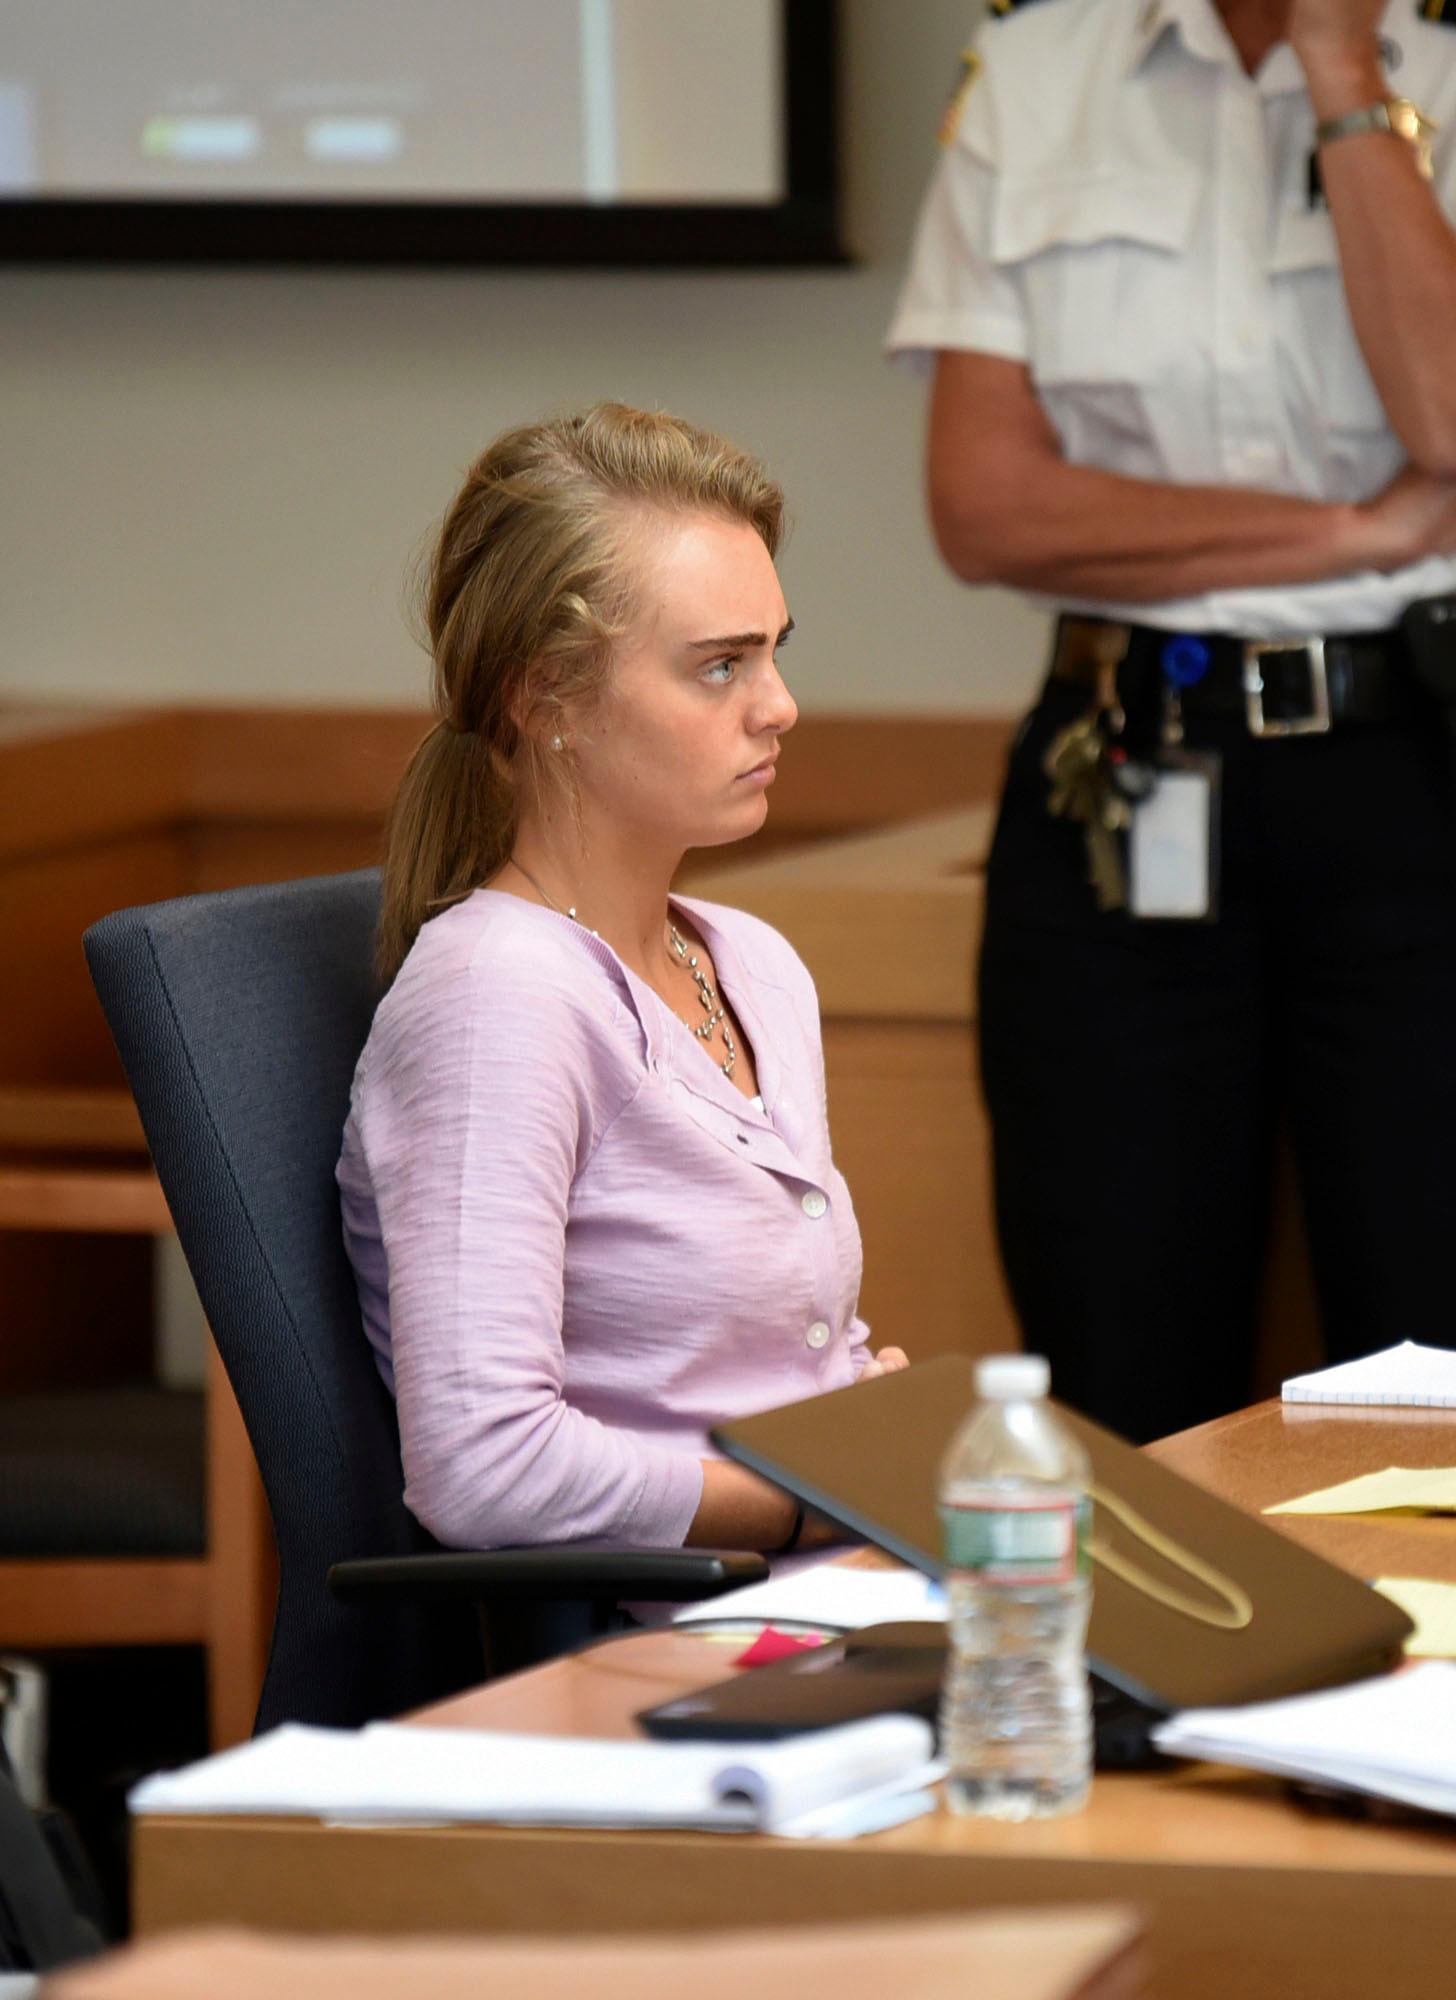 Teen who took life in texting case studied suicide methods | KTVL1456 x 2000